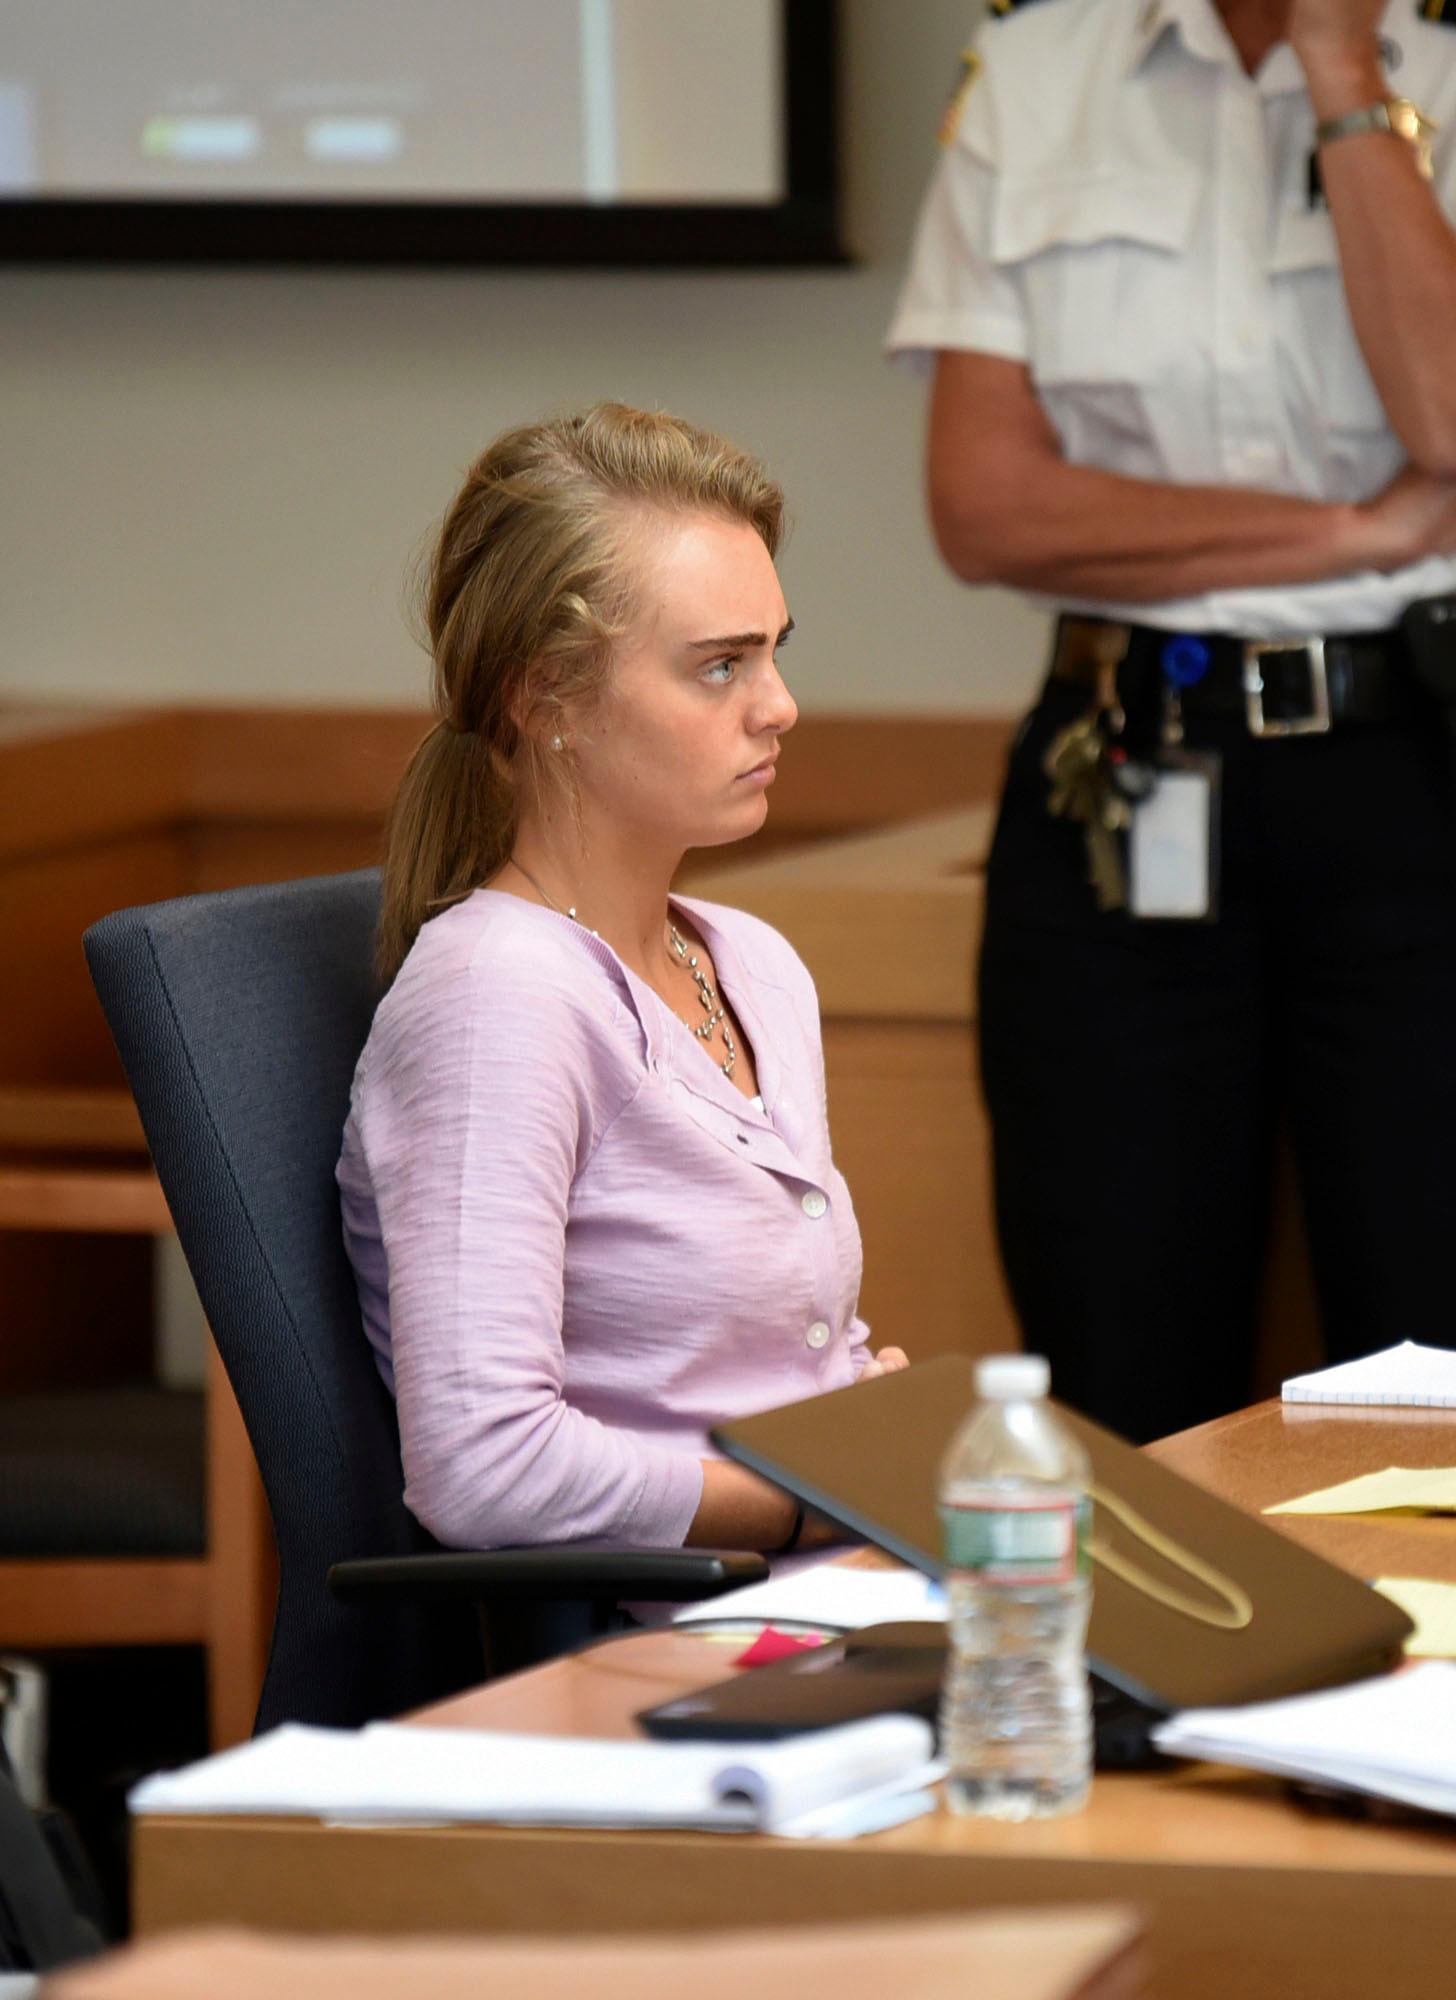 Teen who took life in texting case studied suicide methods | KTVL1456 x 2000